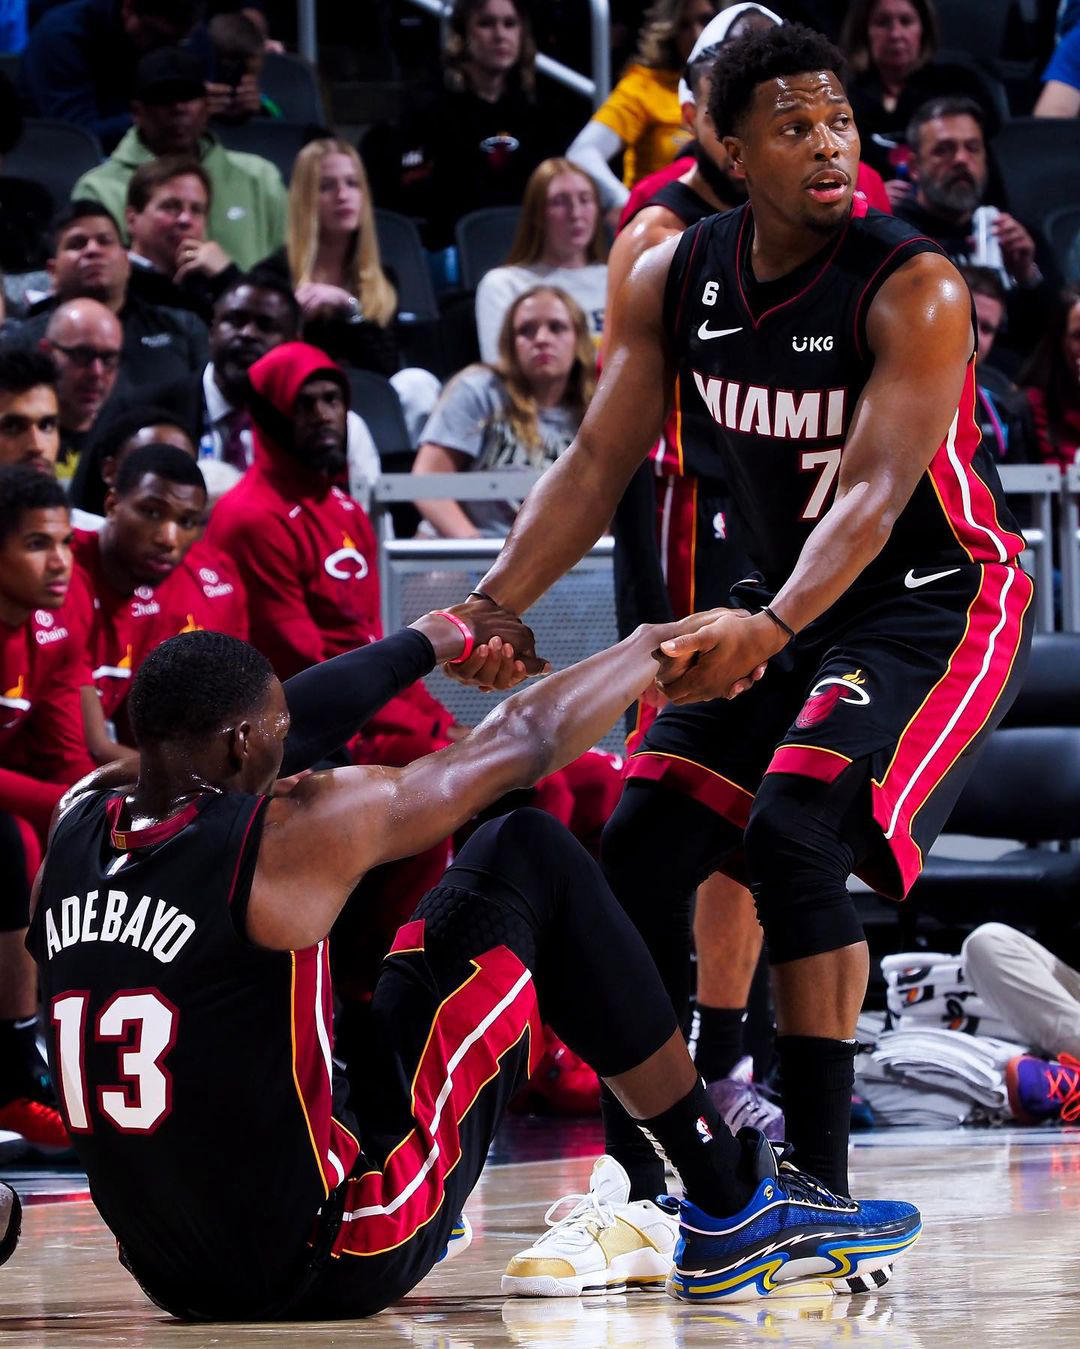 Miami HEAT - First 10 games in the books